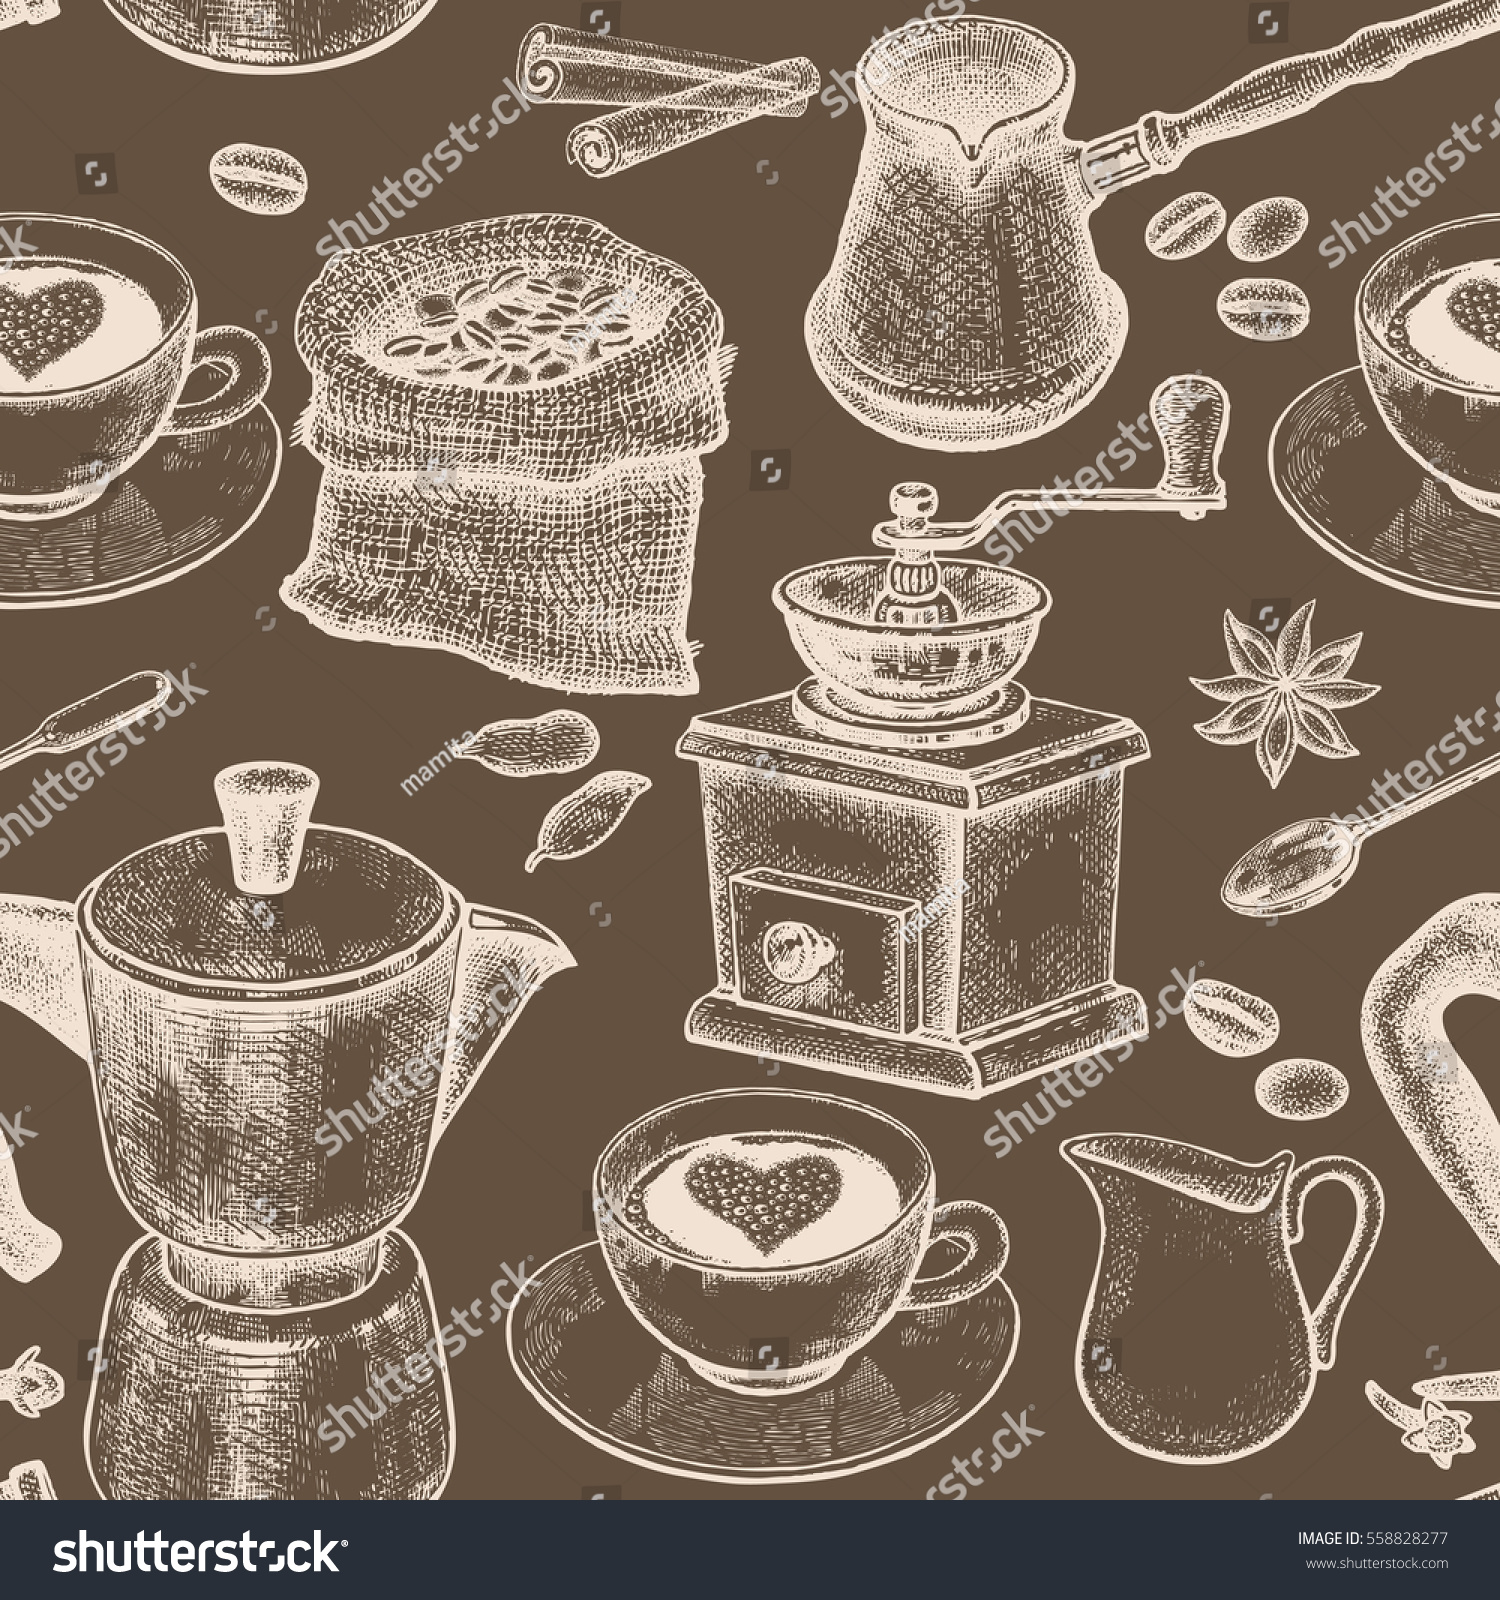 SVG of Coffee pot, coffee grinder, coffee cups, donuts, Turkish ibrik, jug of milk. Seamless vector pattern. Black and white art illustration. Vintage. Kitchen design for textiles, paper, packaging, wrapping svg